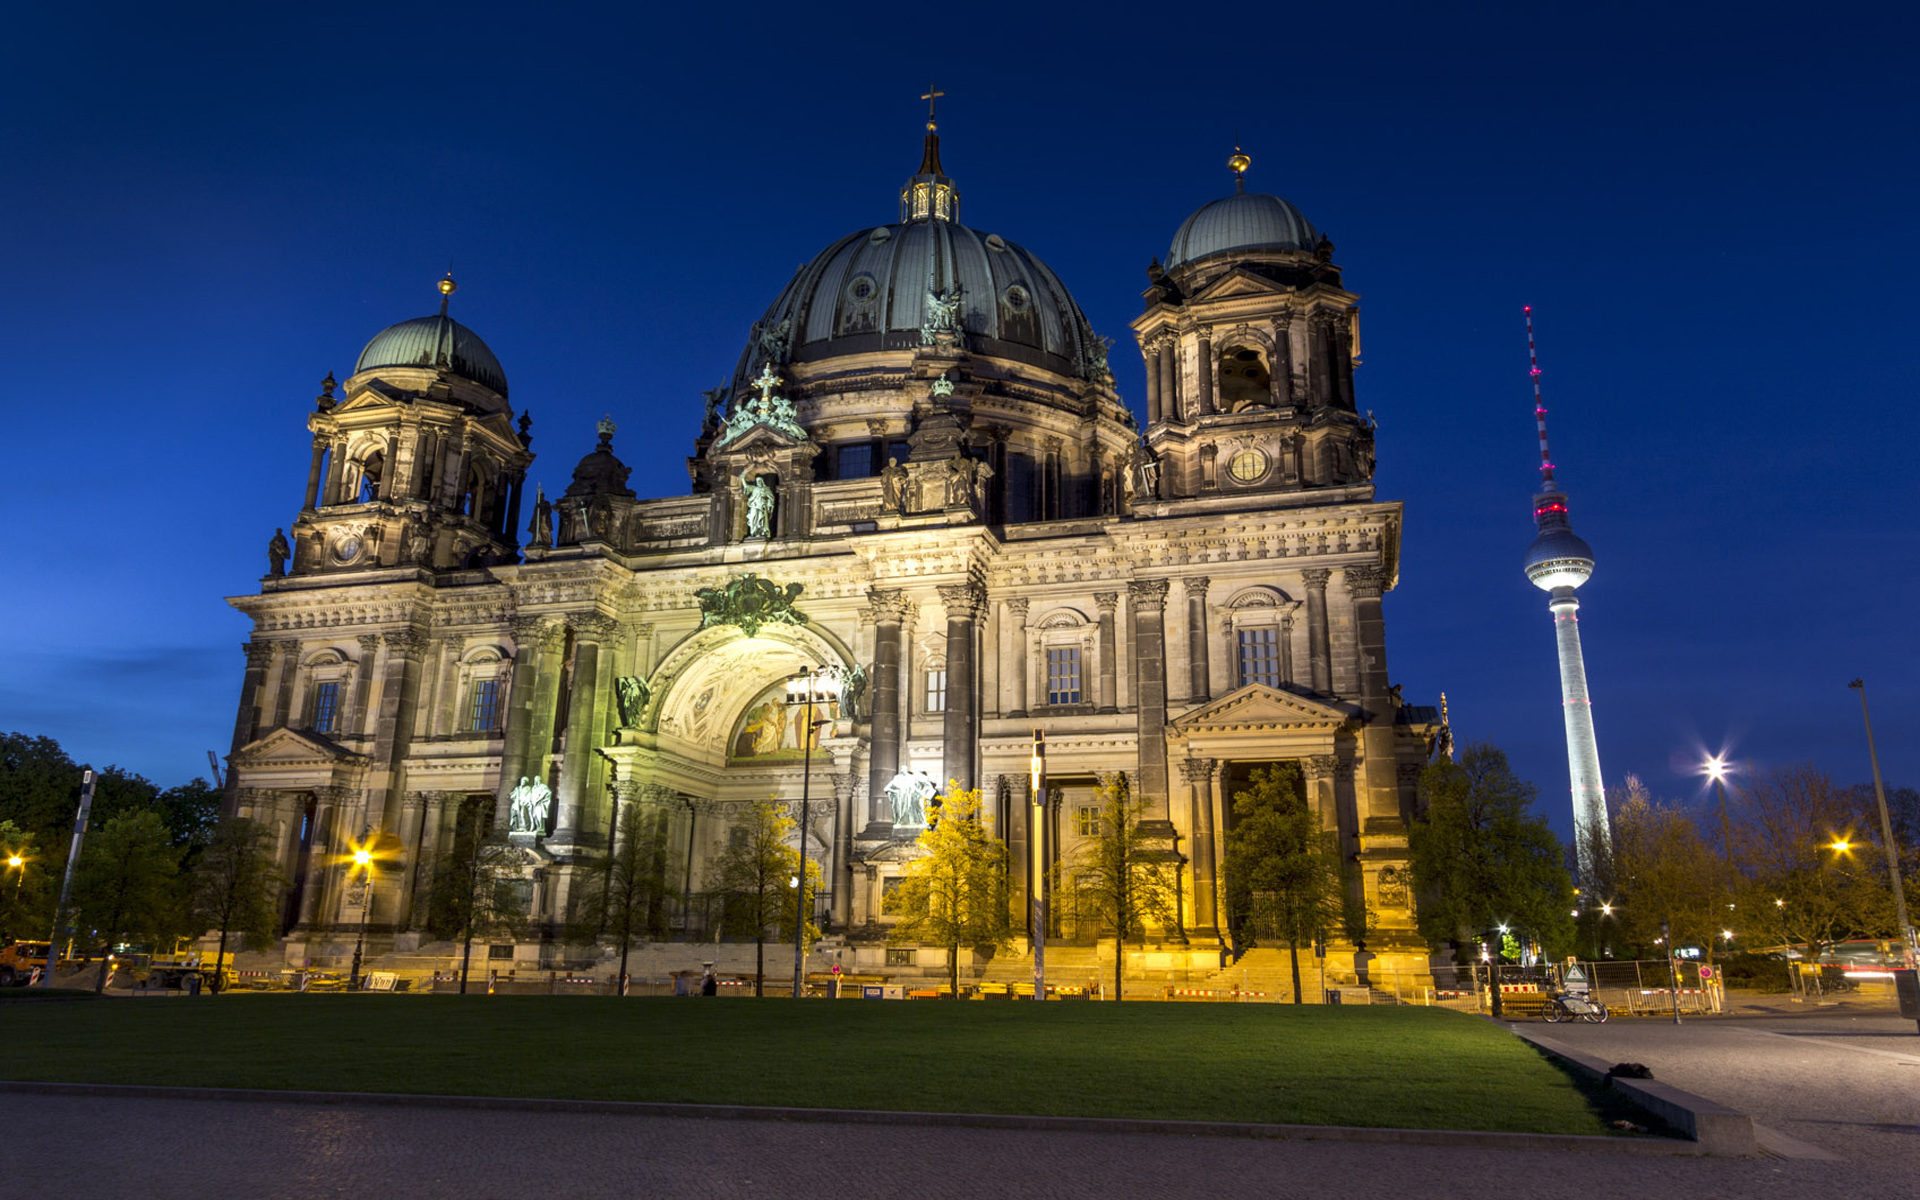 Berlin Cathedral, Desktop wallpaper, Towering beauty, Architectural magnificence, 1920x1200 HD Desktop